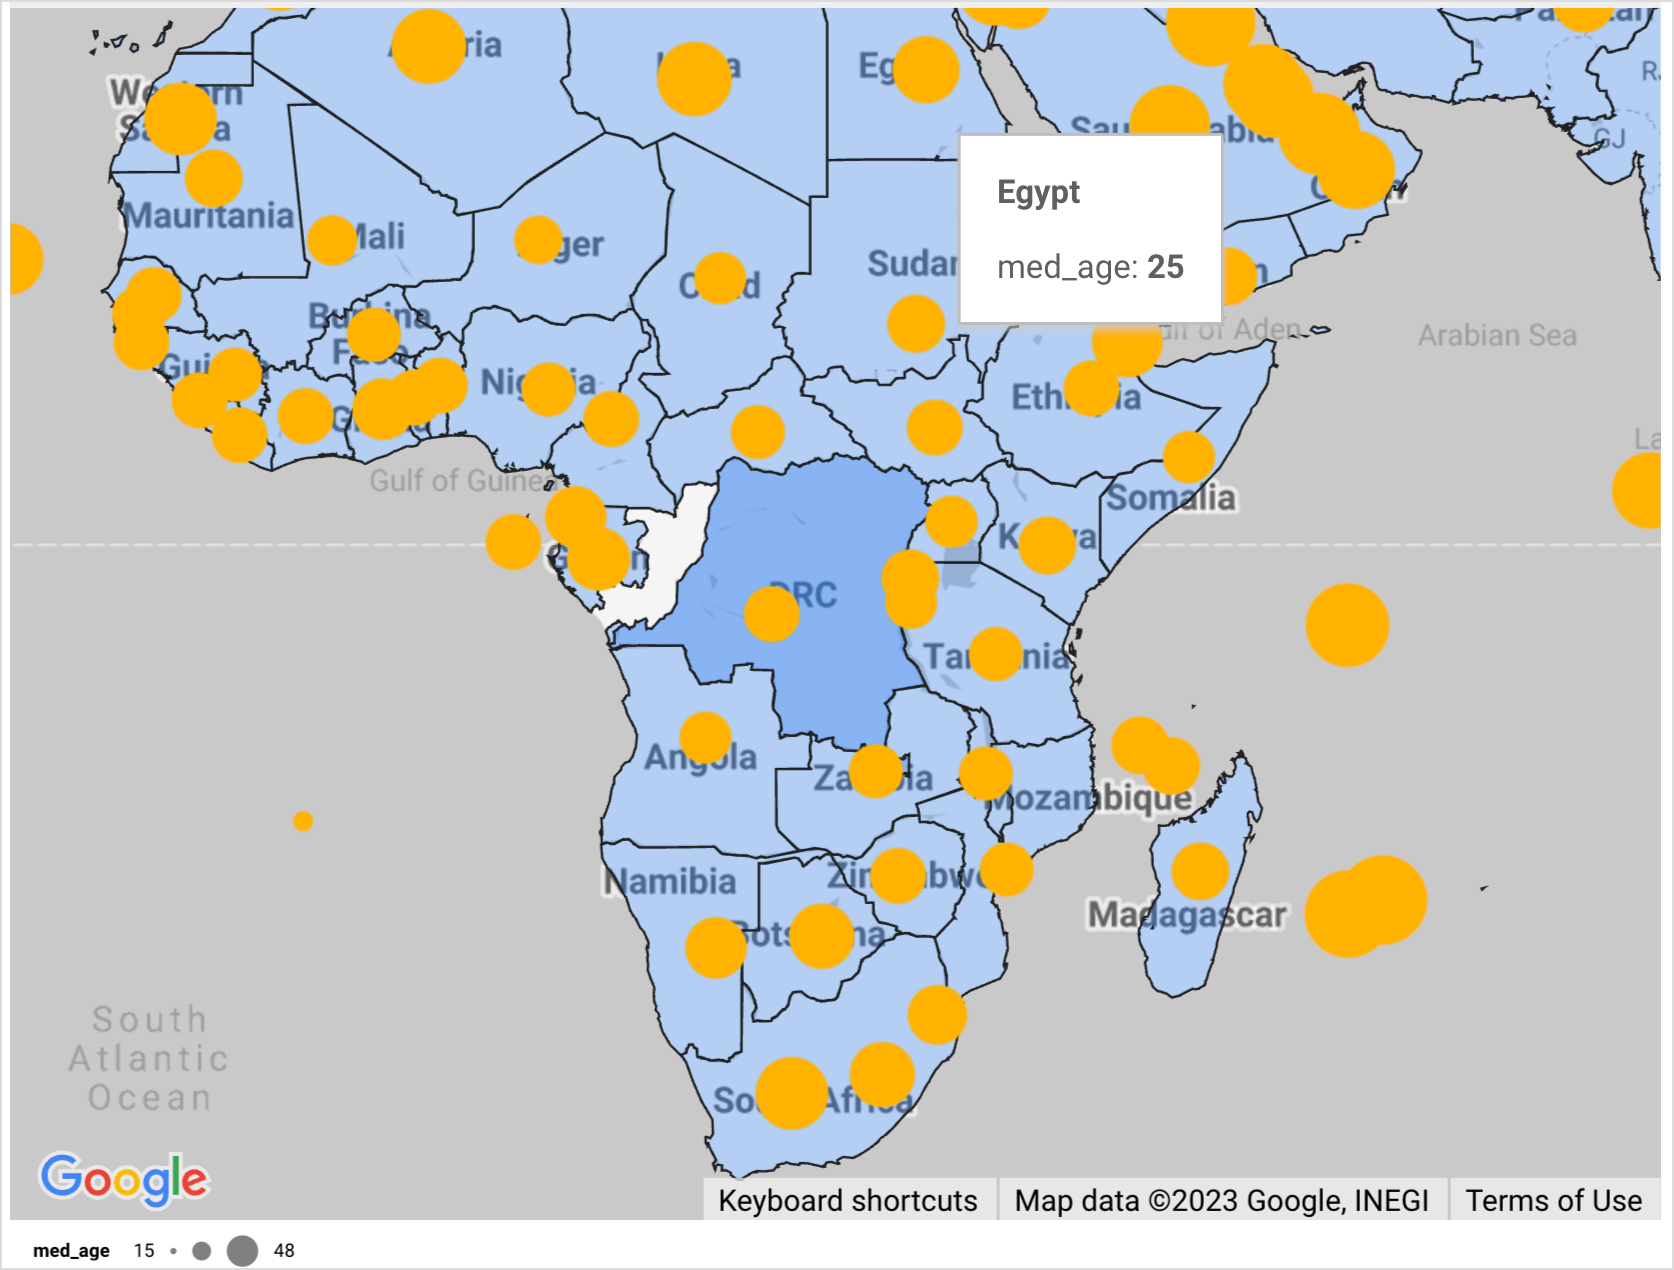 A filled map of African countries with bubbles indicating median population age. The mouse is hovering over Egypt, displaying a tooltip with the filled map layer and additional map layer fields.